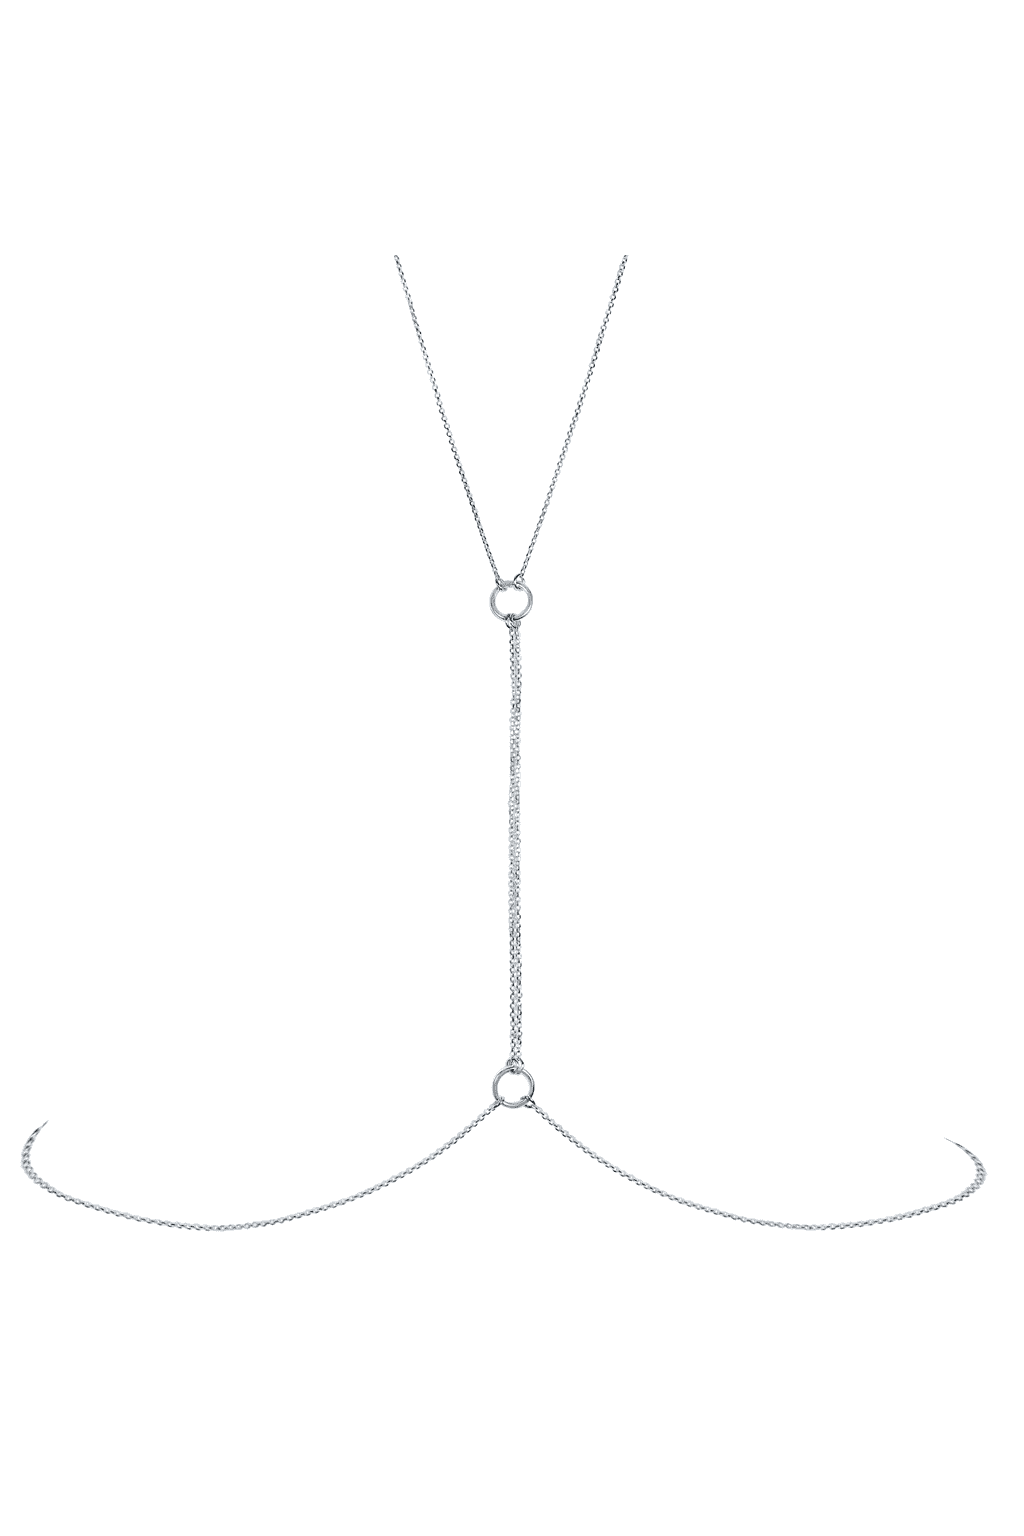 BODY CHAIN – 925 SILVER & LOOPS